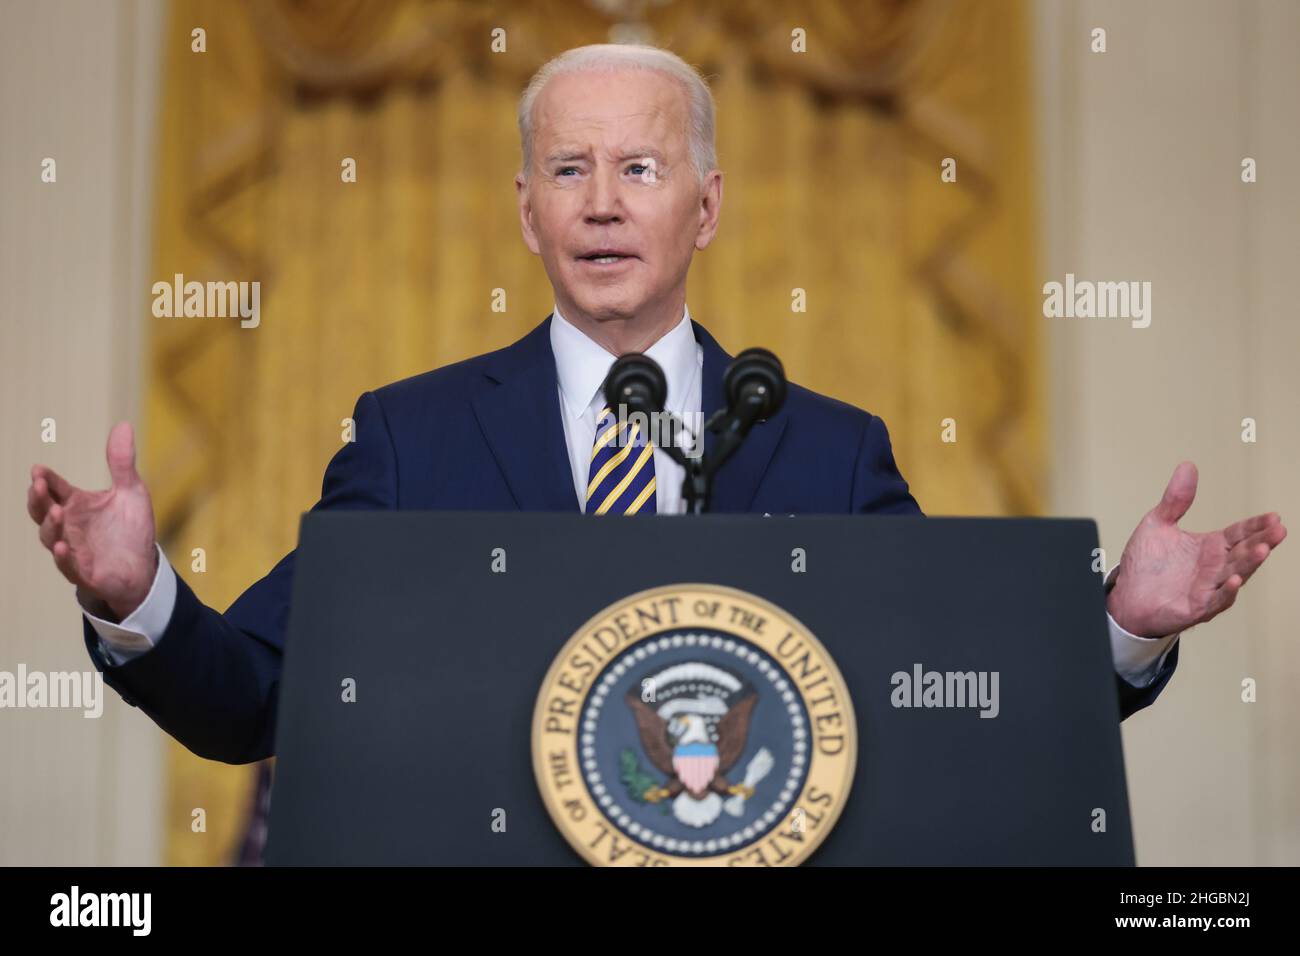 United States President Joe Biden holds a press conference in the East Room of the White House in Washington, DC on Wednesday, January 19, 2022.Credit: Oliver Contreras/Pool via CNP /MediaPunch Stock Photo